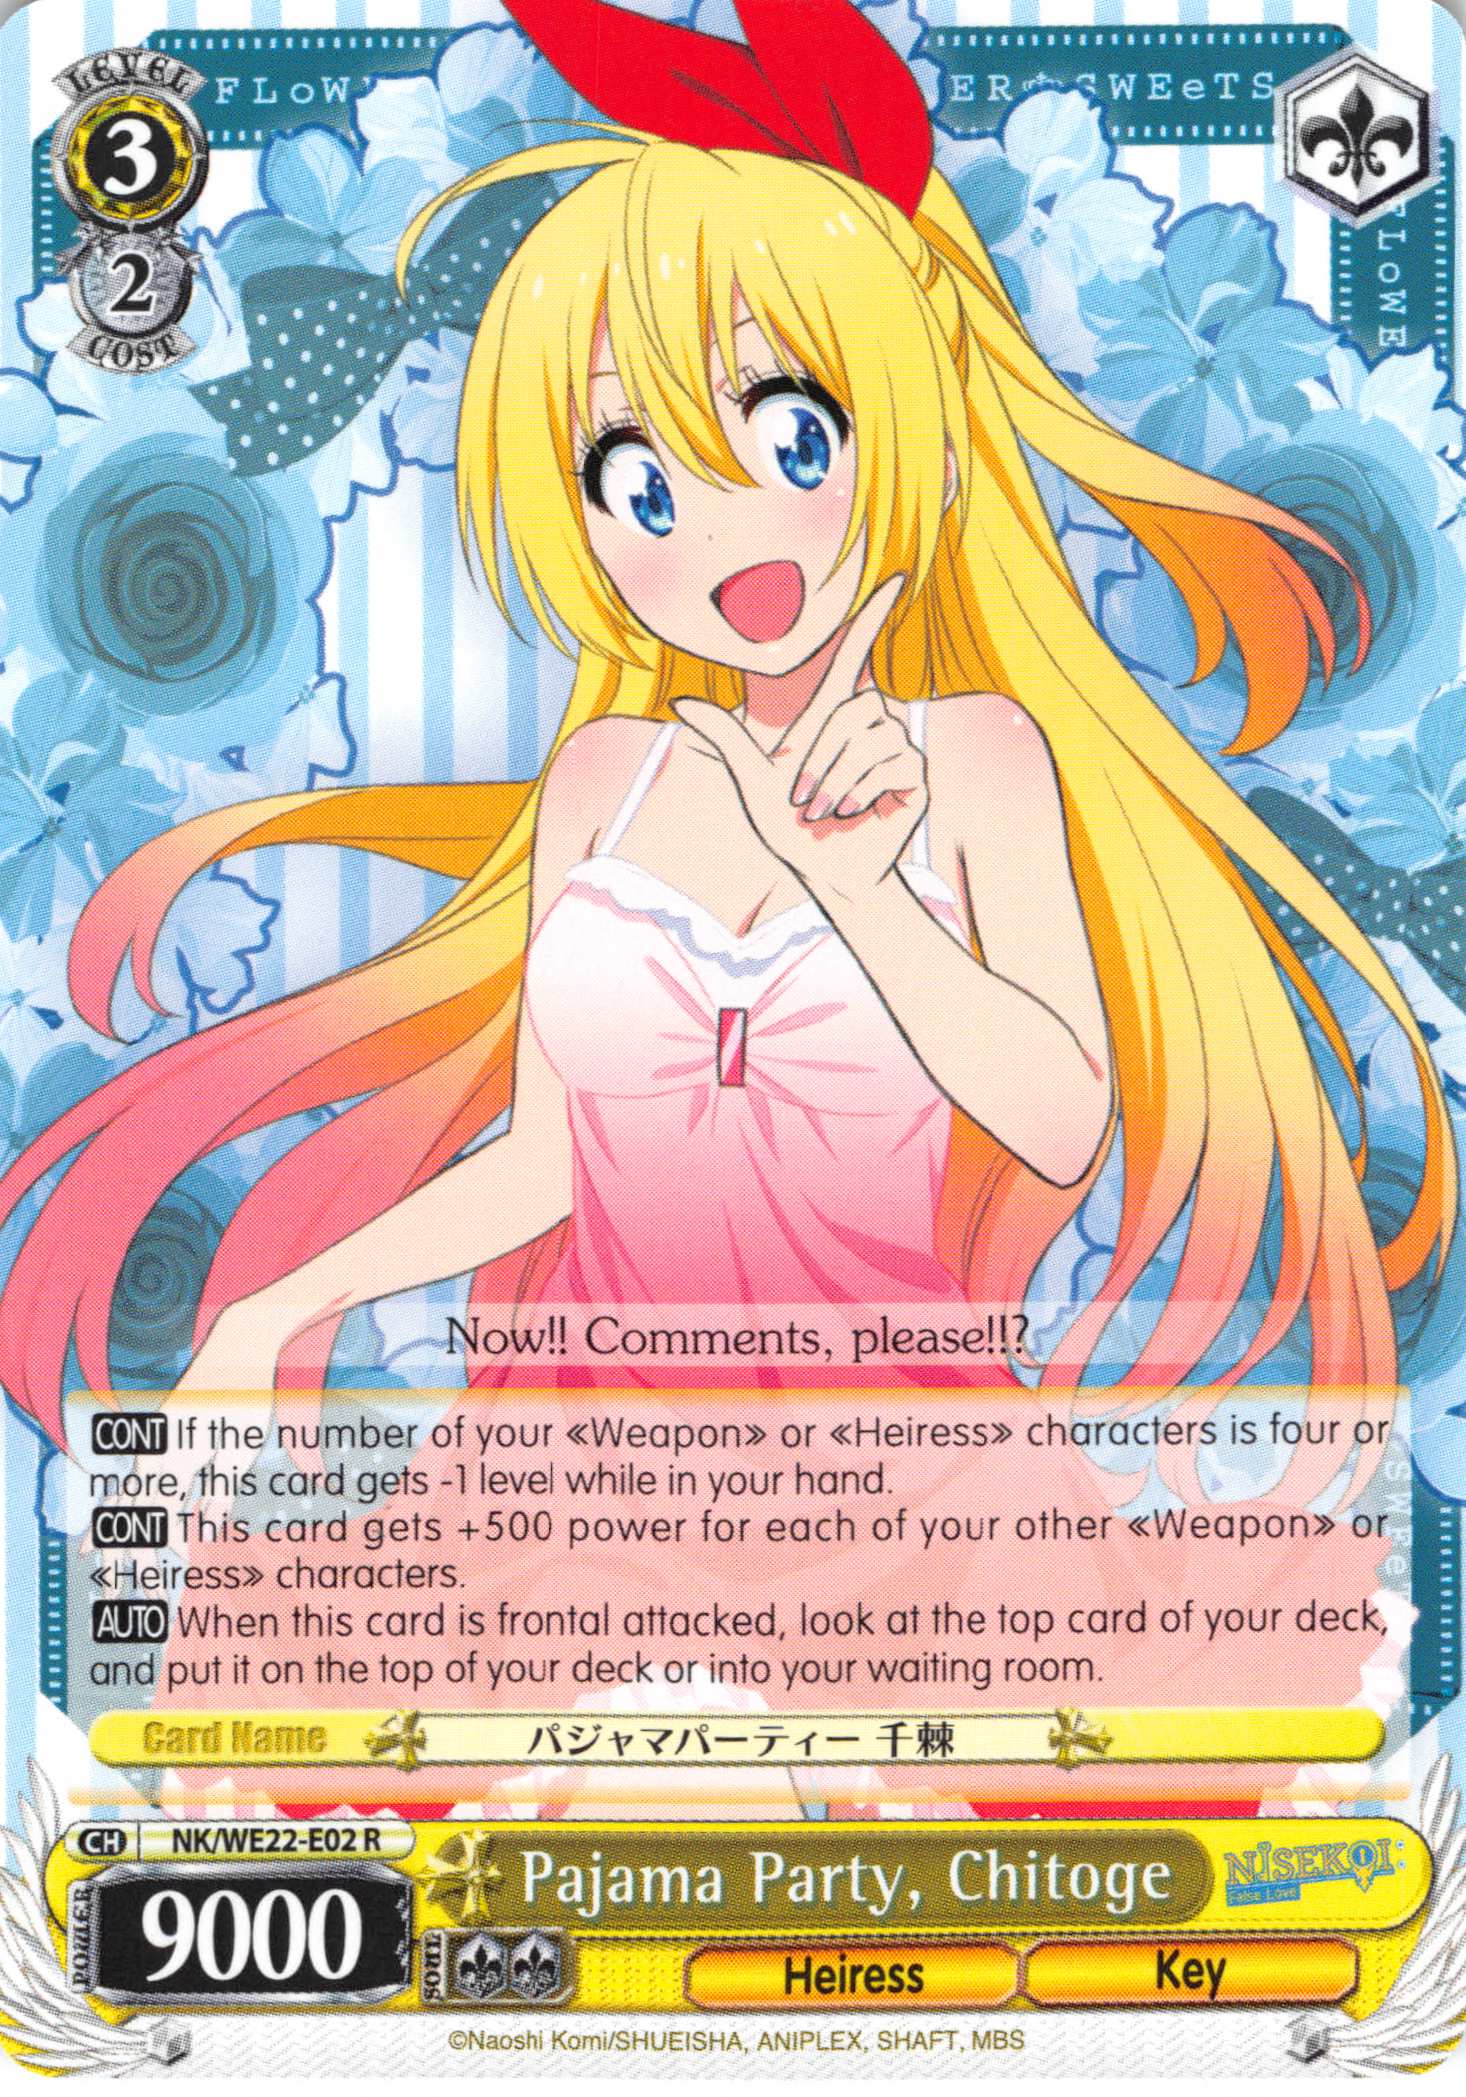 Pajama Party, Chitoge (NK/WE22-E02) [NISEKOI Extra Booster]